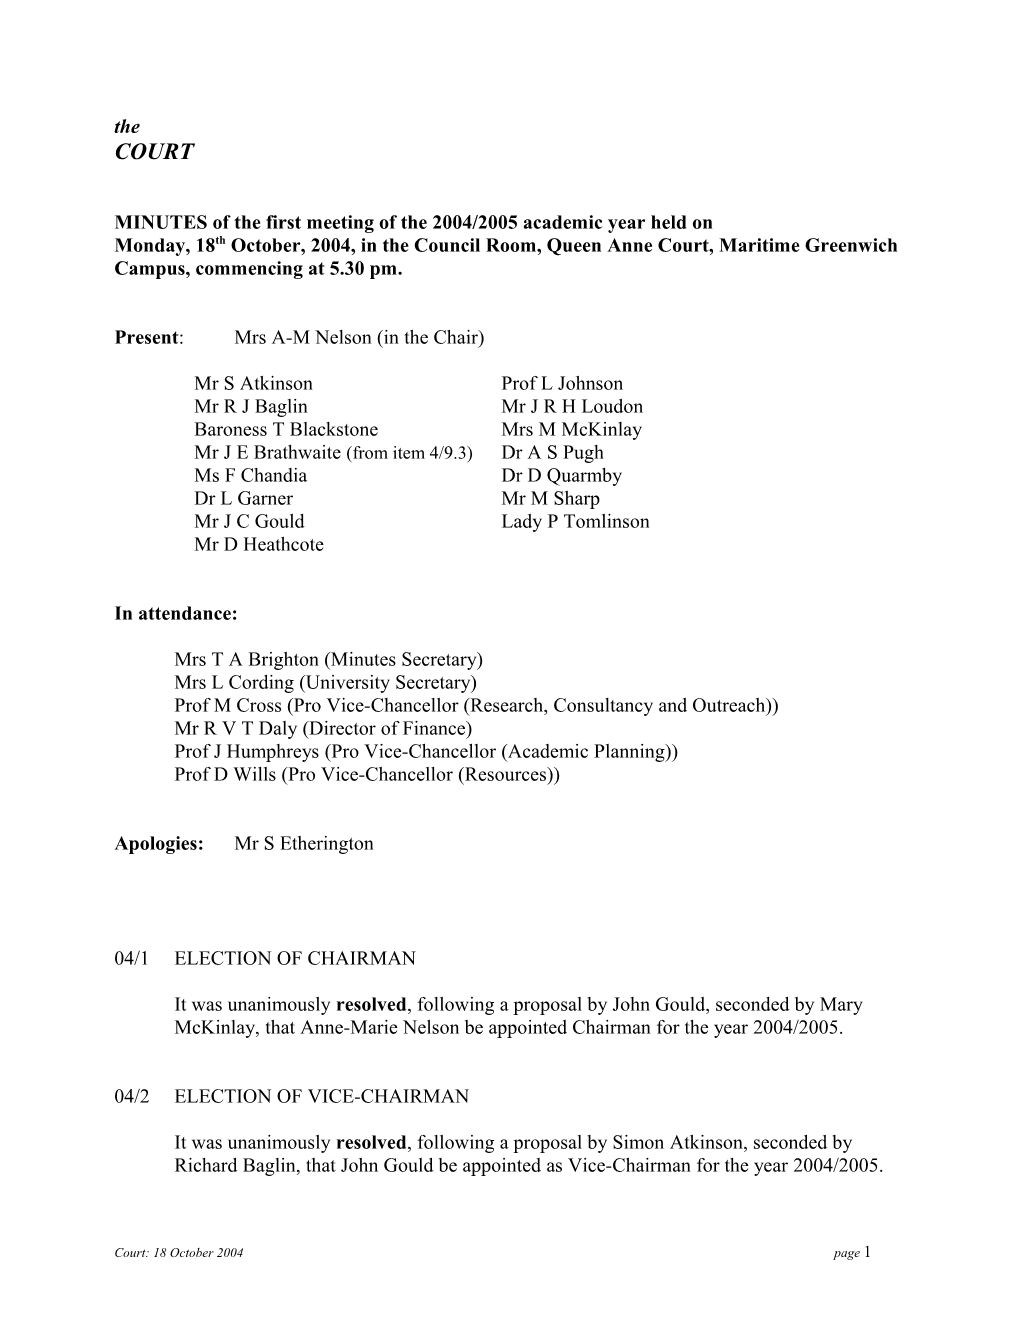 MINUTES of the First Meeting of the 2004/2005 Academic Year Held On